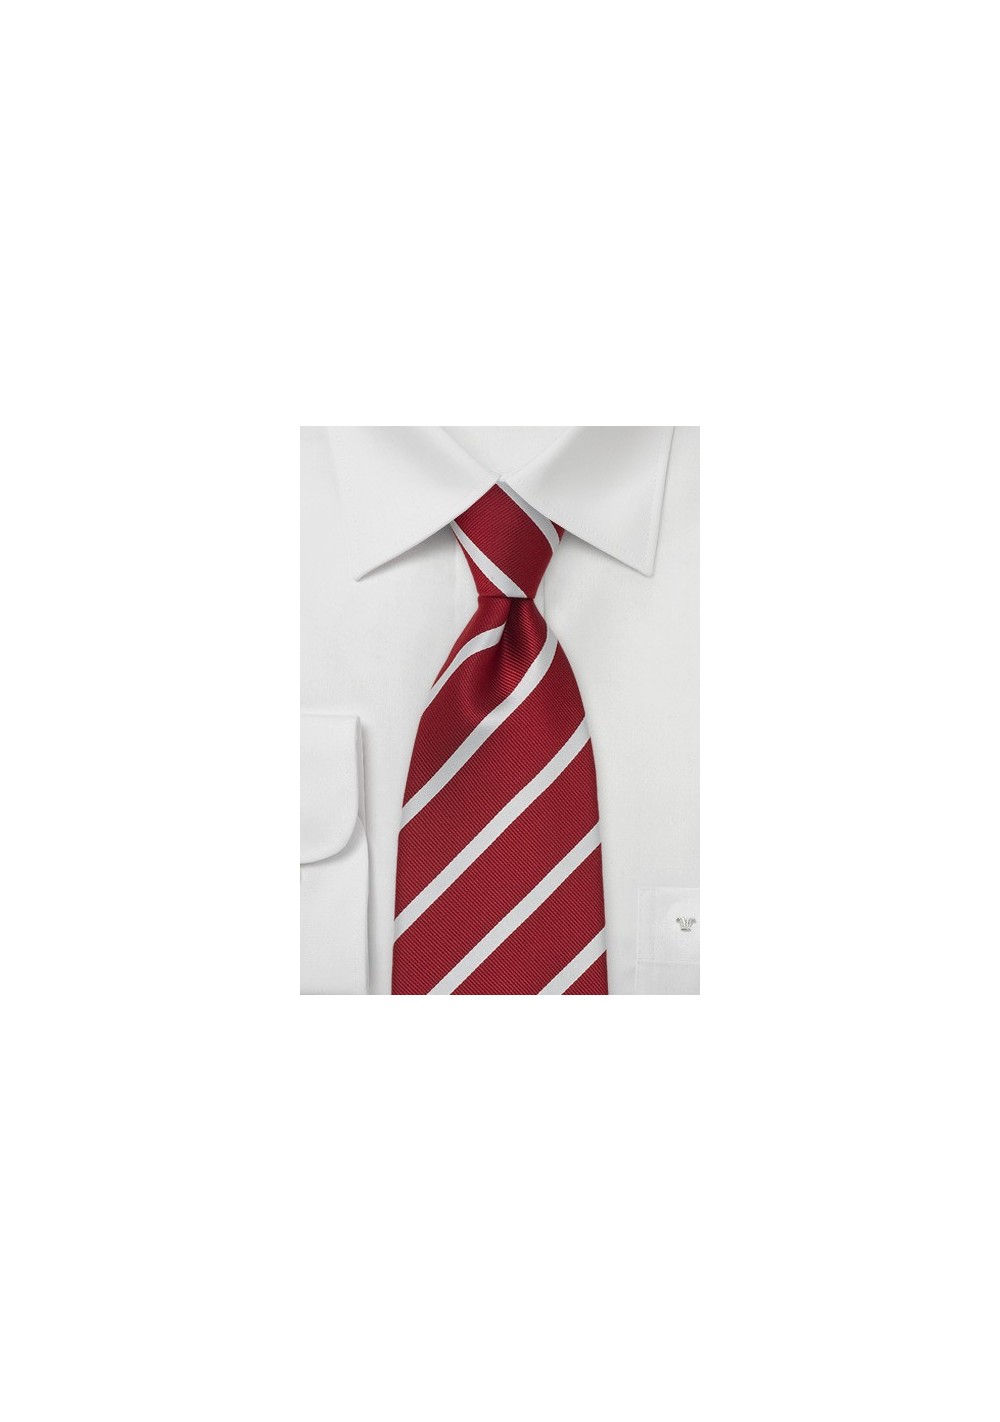 Red & White Striped Silk Tie in XL Length